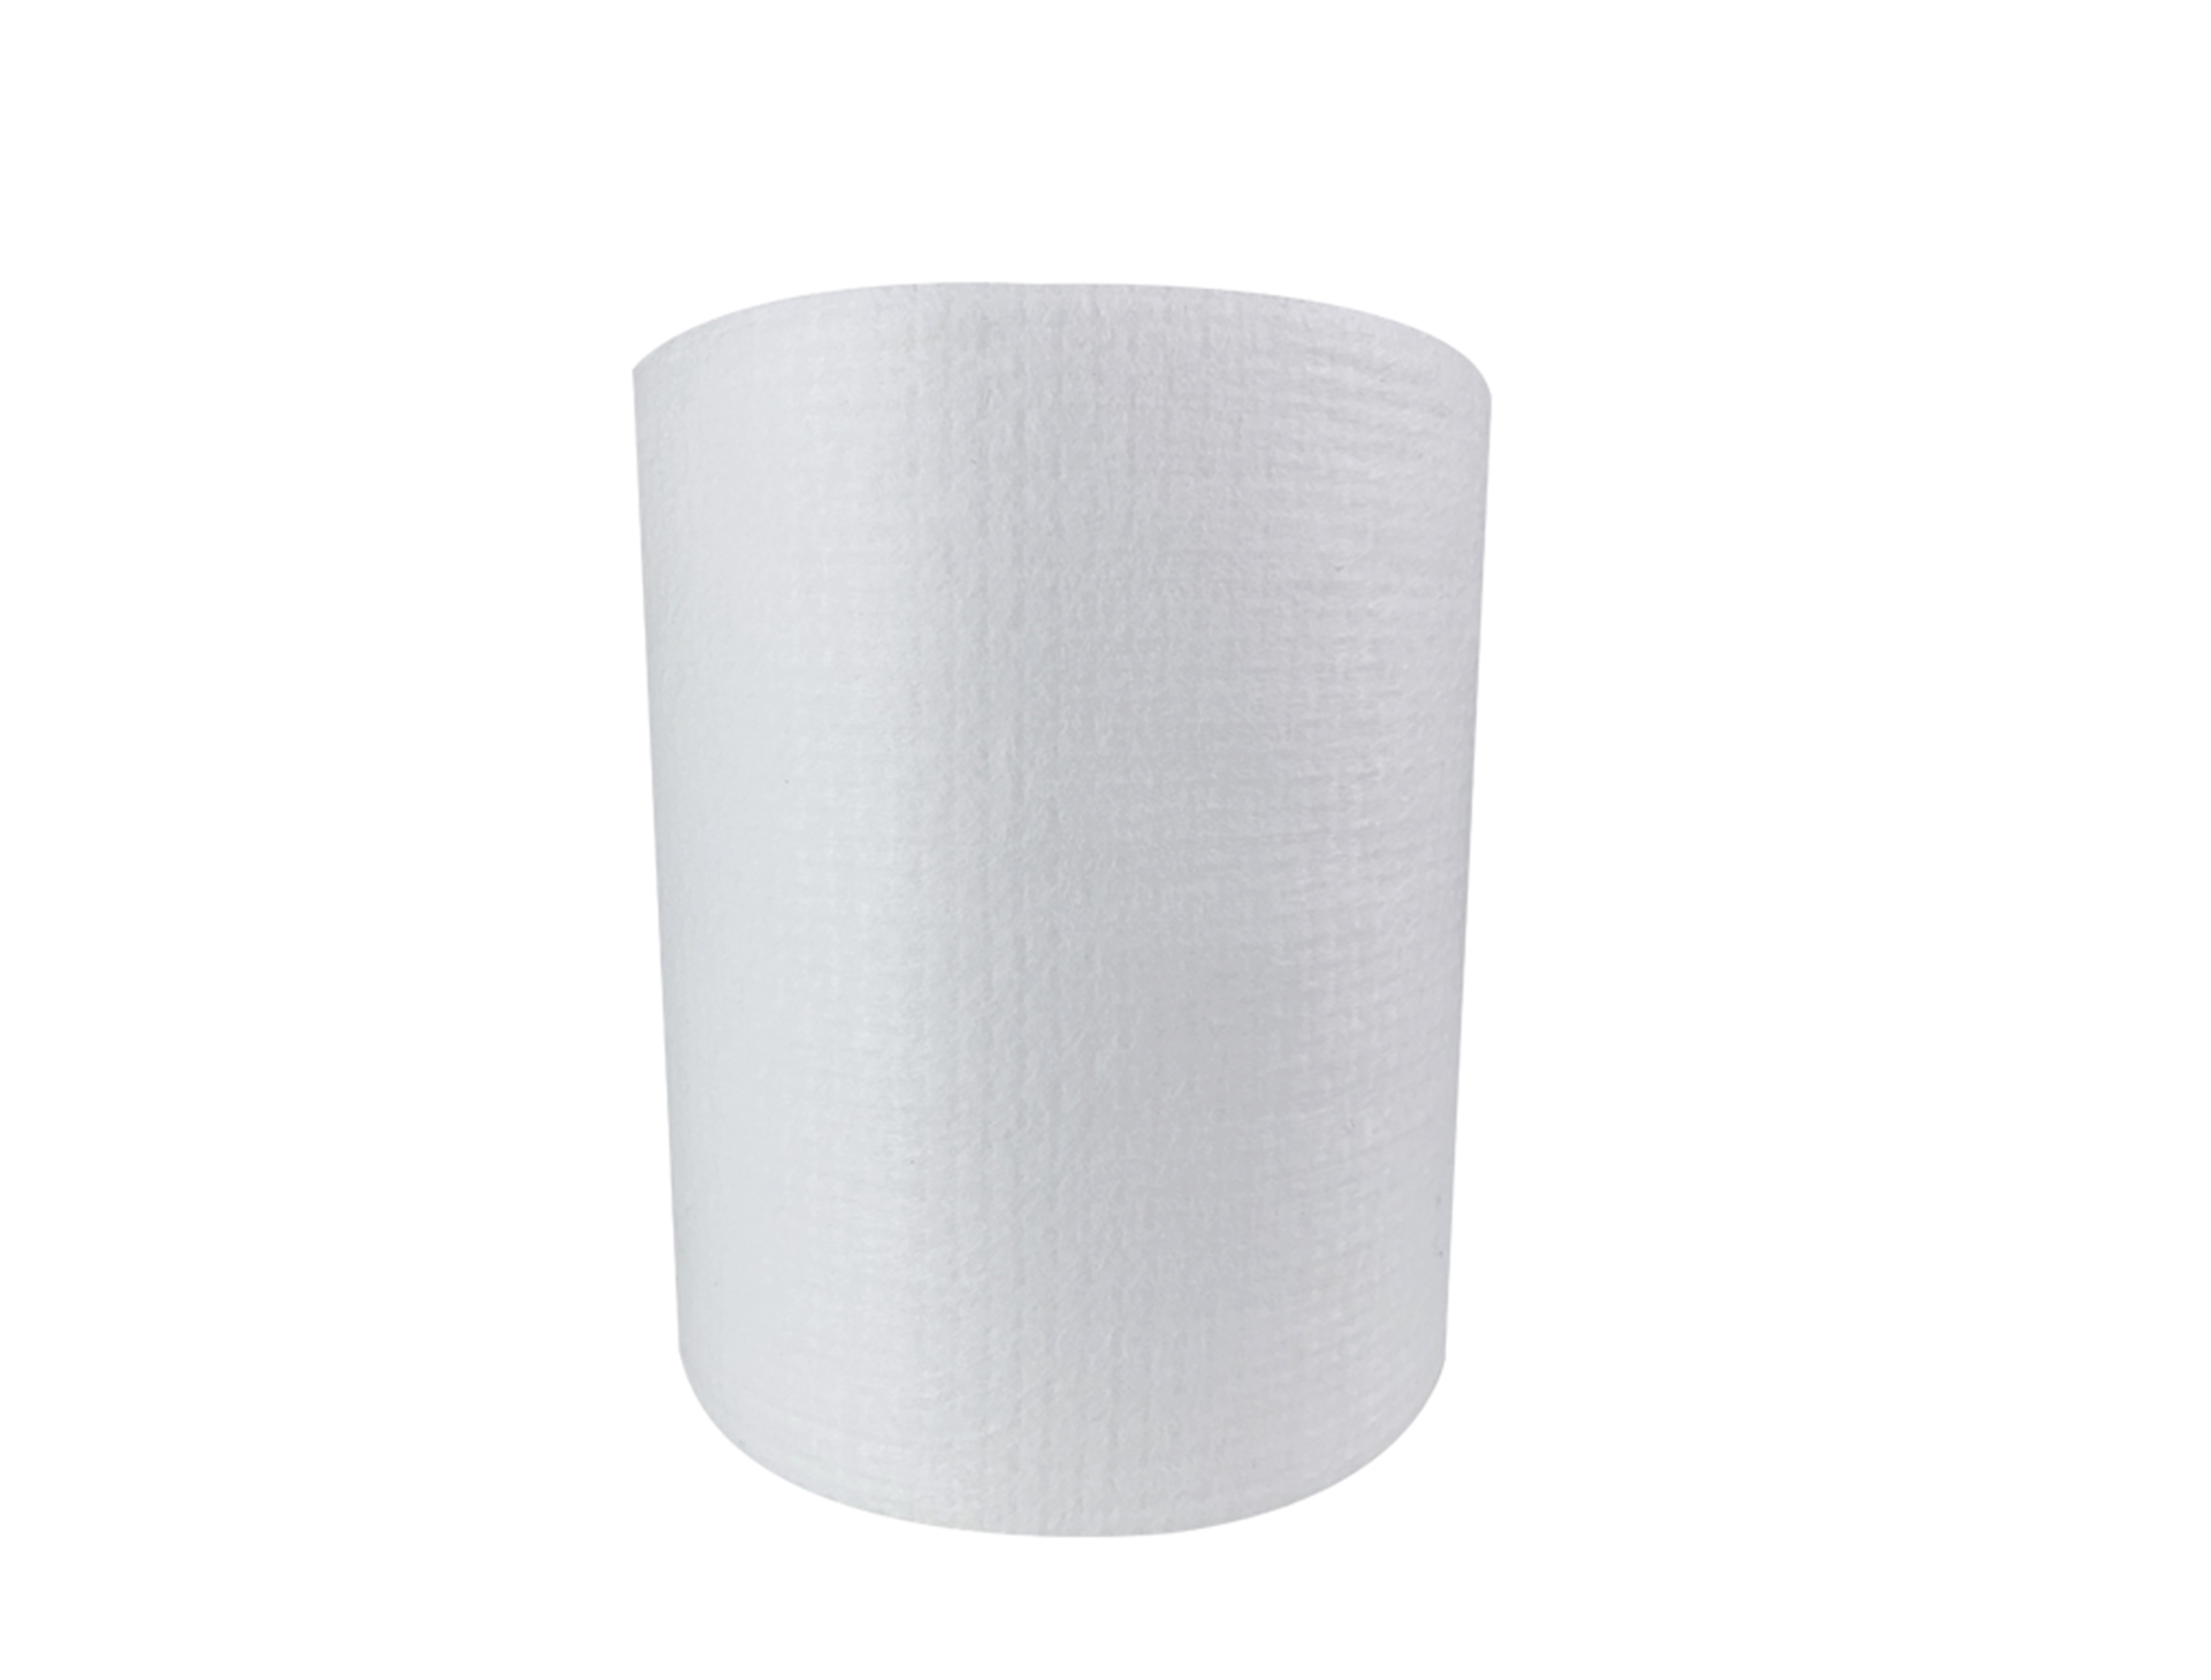 Jiayue Factory Price SSS Ultra Soft Breathable Hydrophilic Nonwoven Raw Material for Baby Diaper Top Sheet